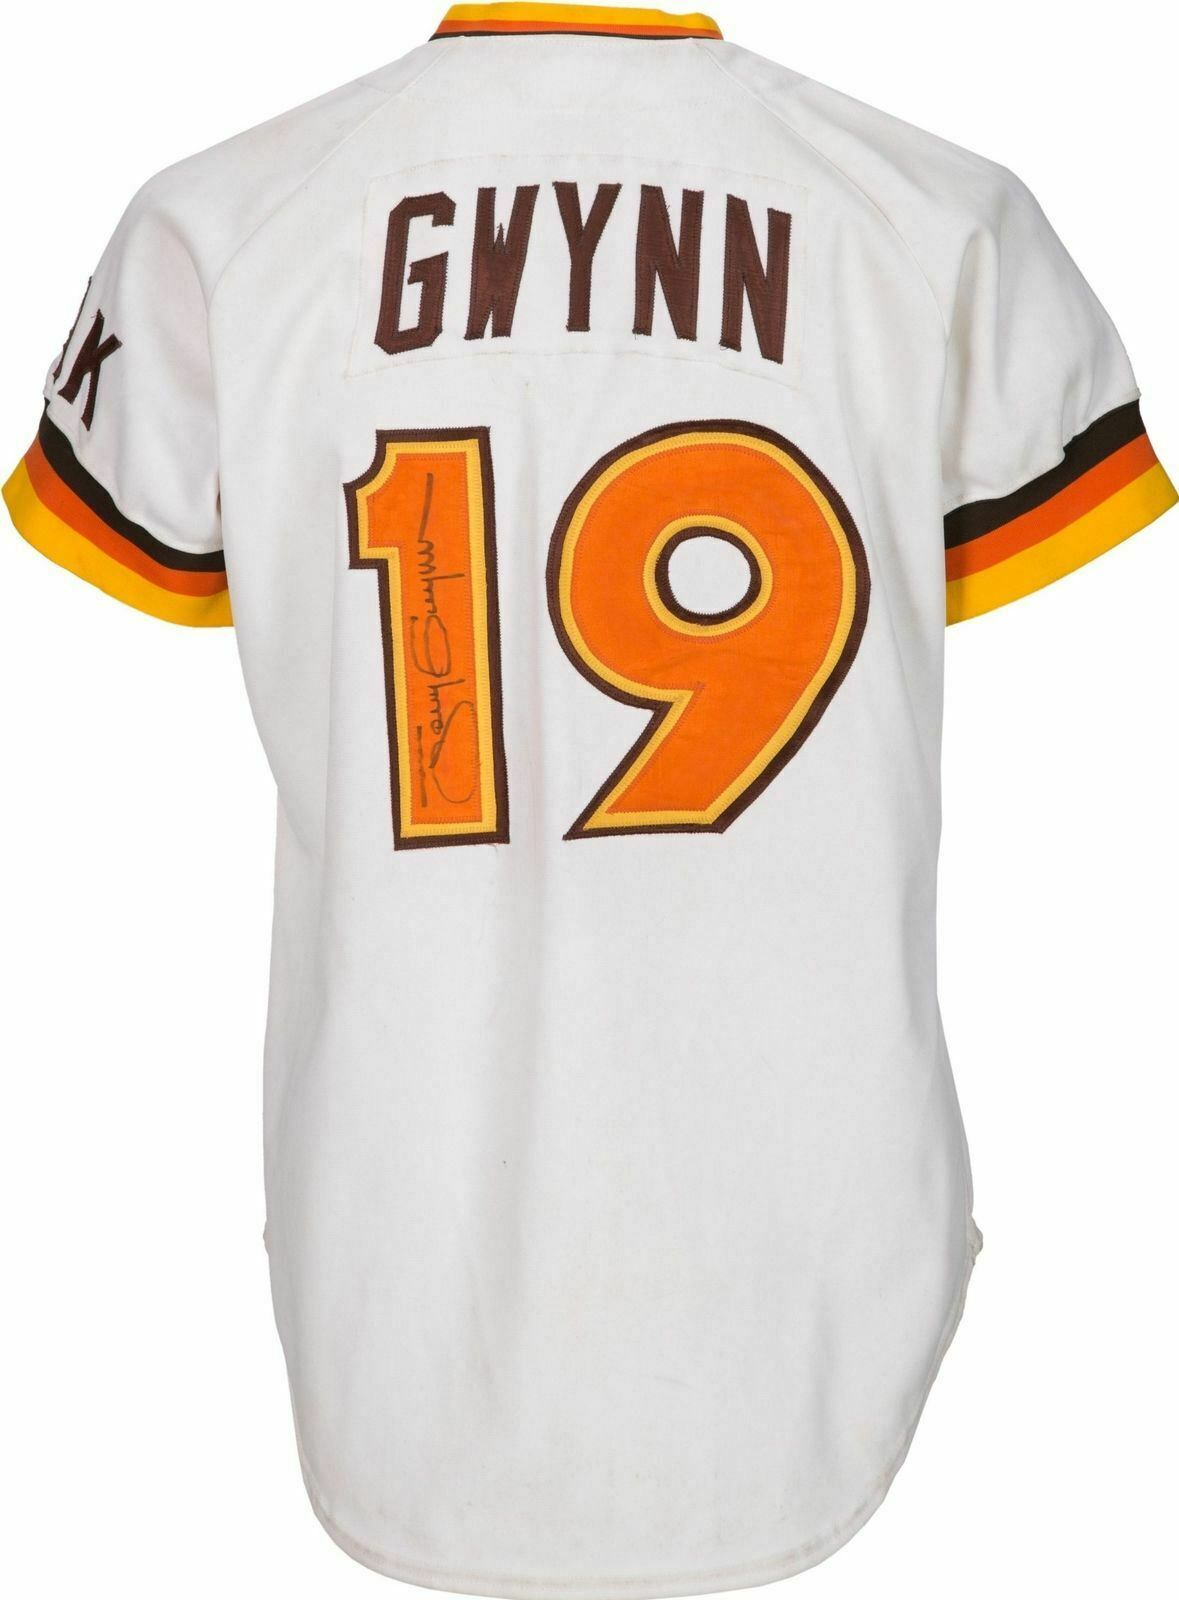 Framed Suede San Diego Padres Tony Gwynn Signed Inscribed Jersey Psa/Dna Coa